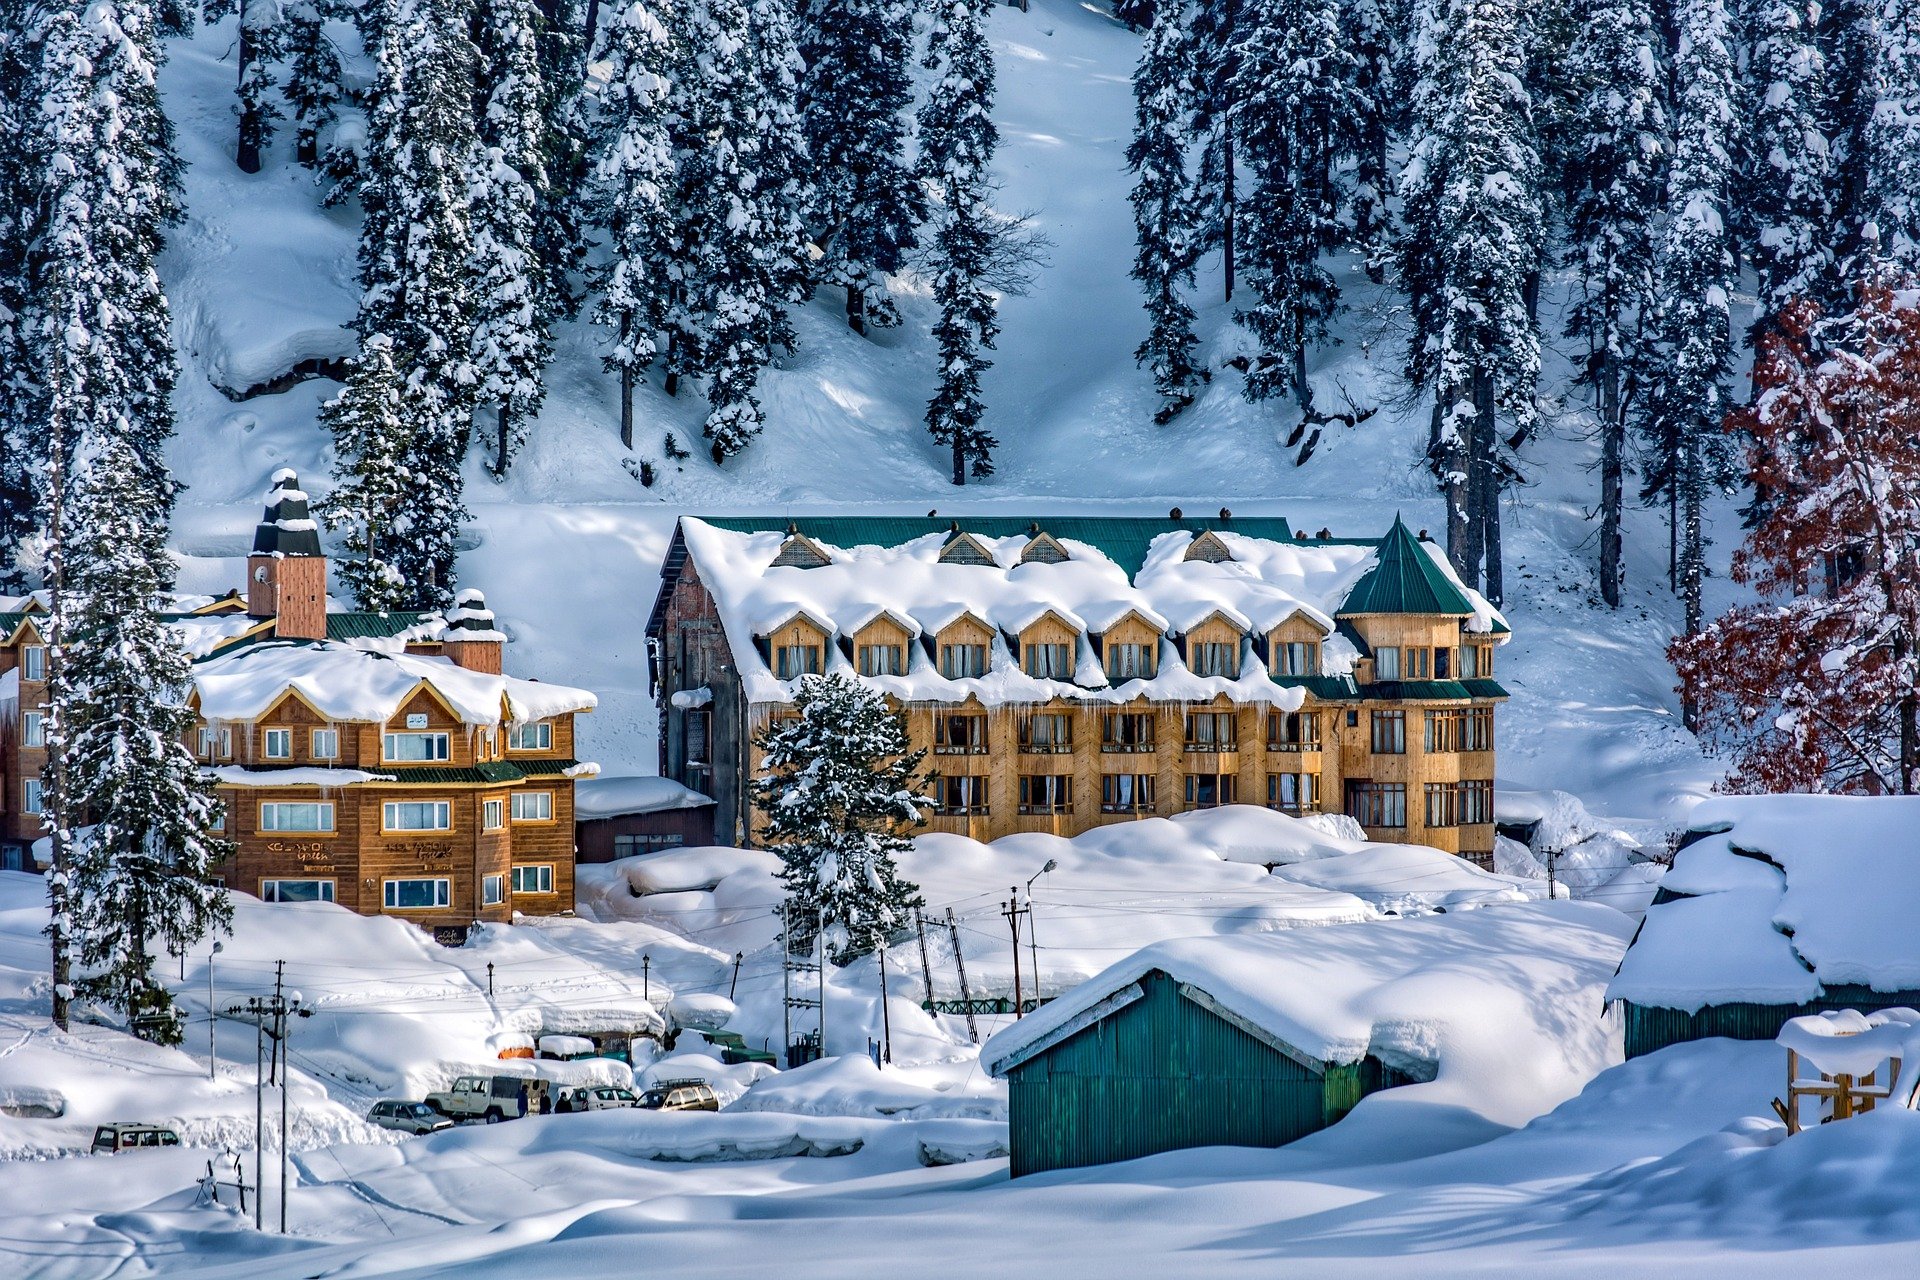 kashmir holiday packages